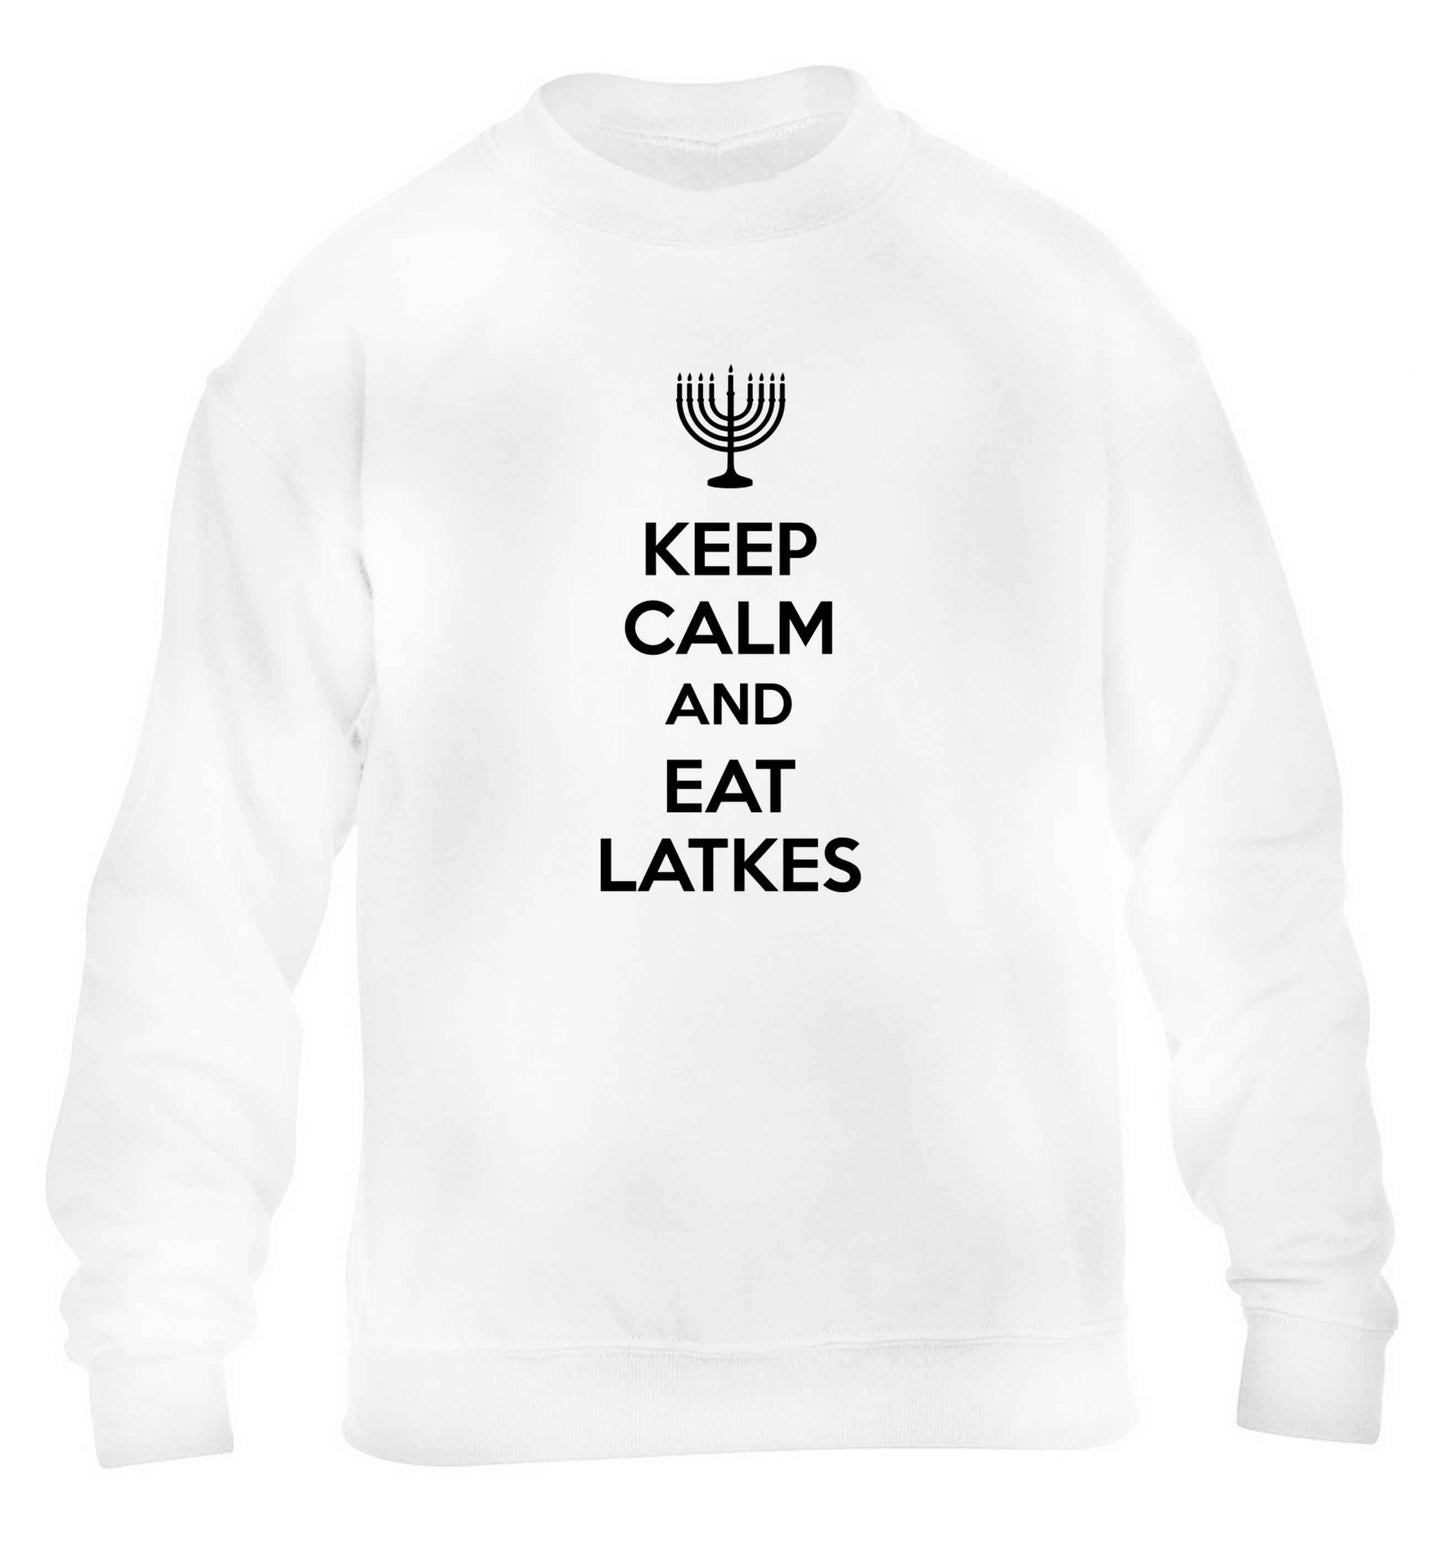 Keep calm and eat latkes children's white sweater 12-13 Years